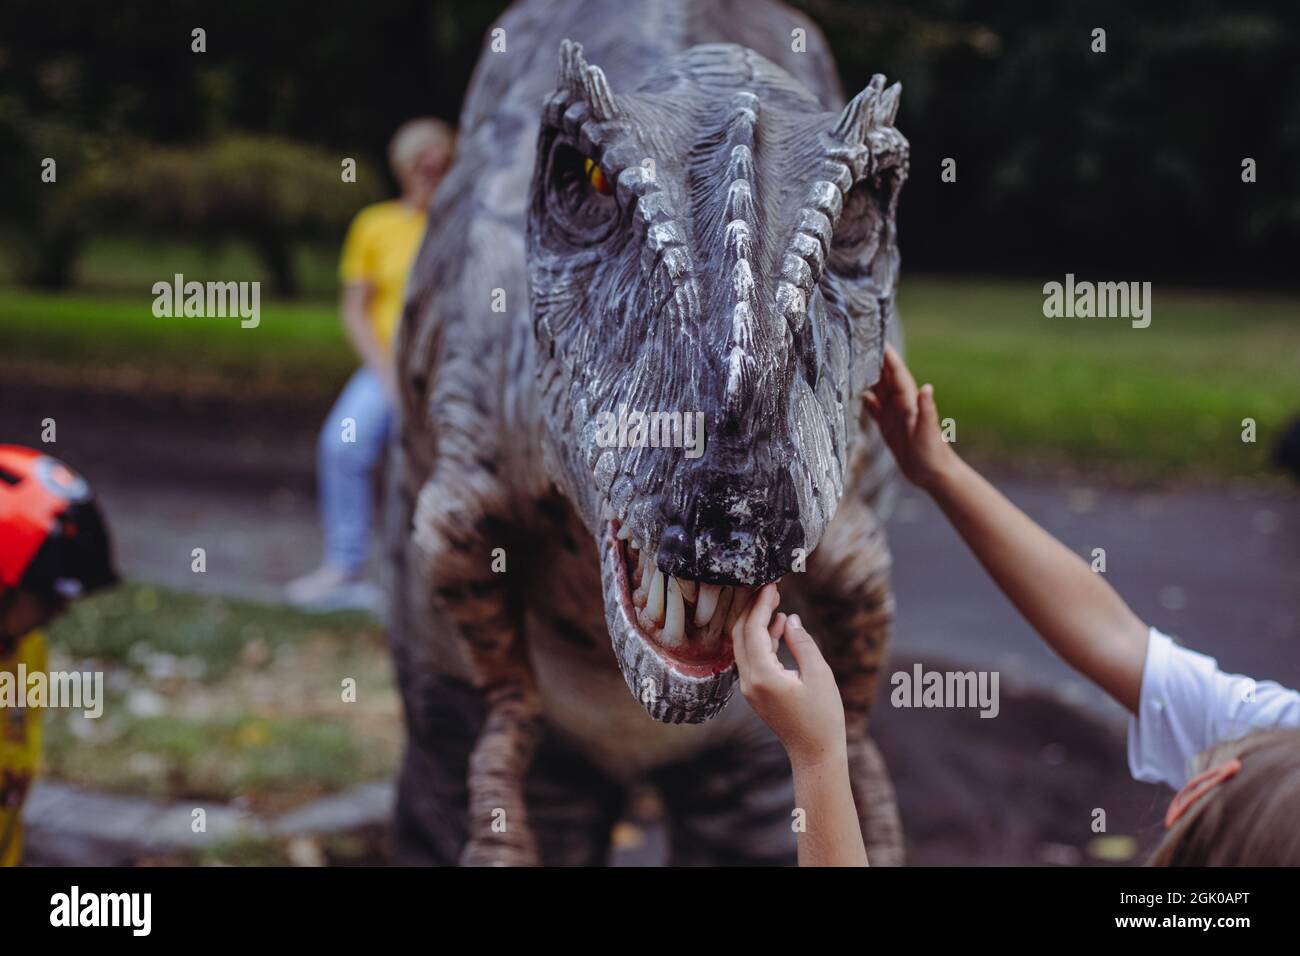 Bucharest, Romania - August 29, 2021: A man costumed as a carnivorous dinosaur walks between people and let’s them pet him during an outdoors event in Stock Photo